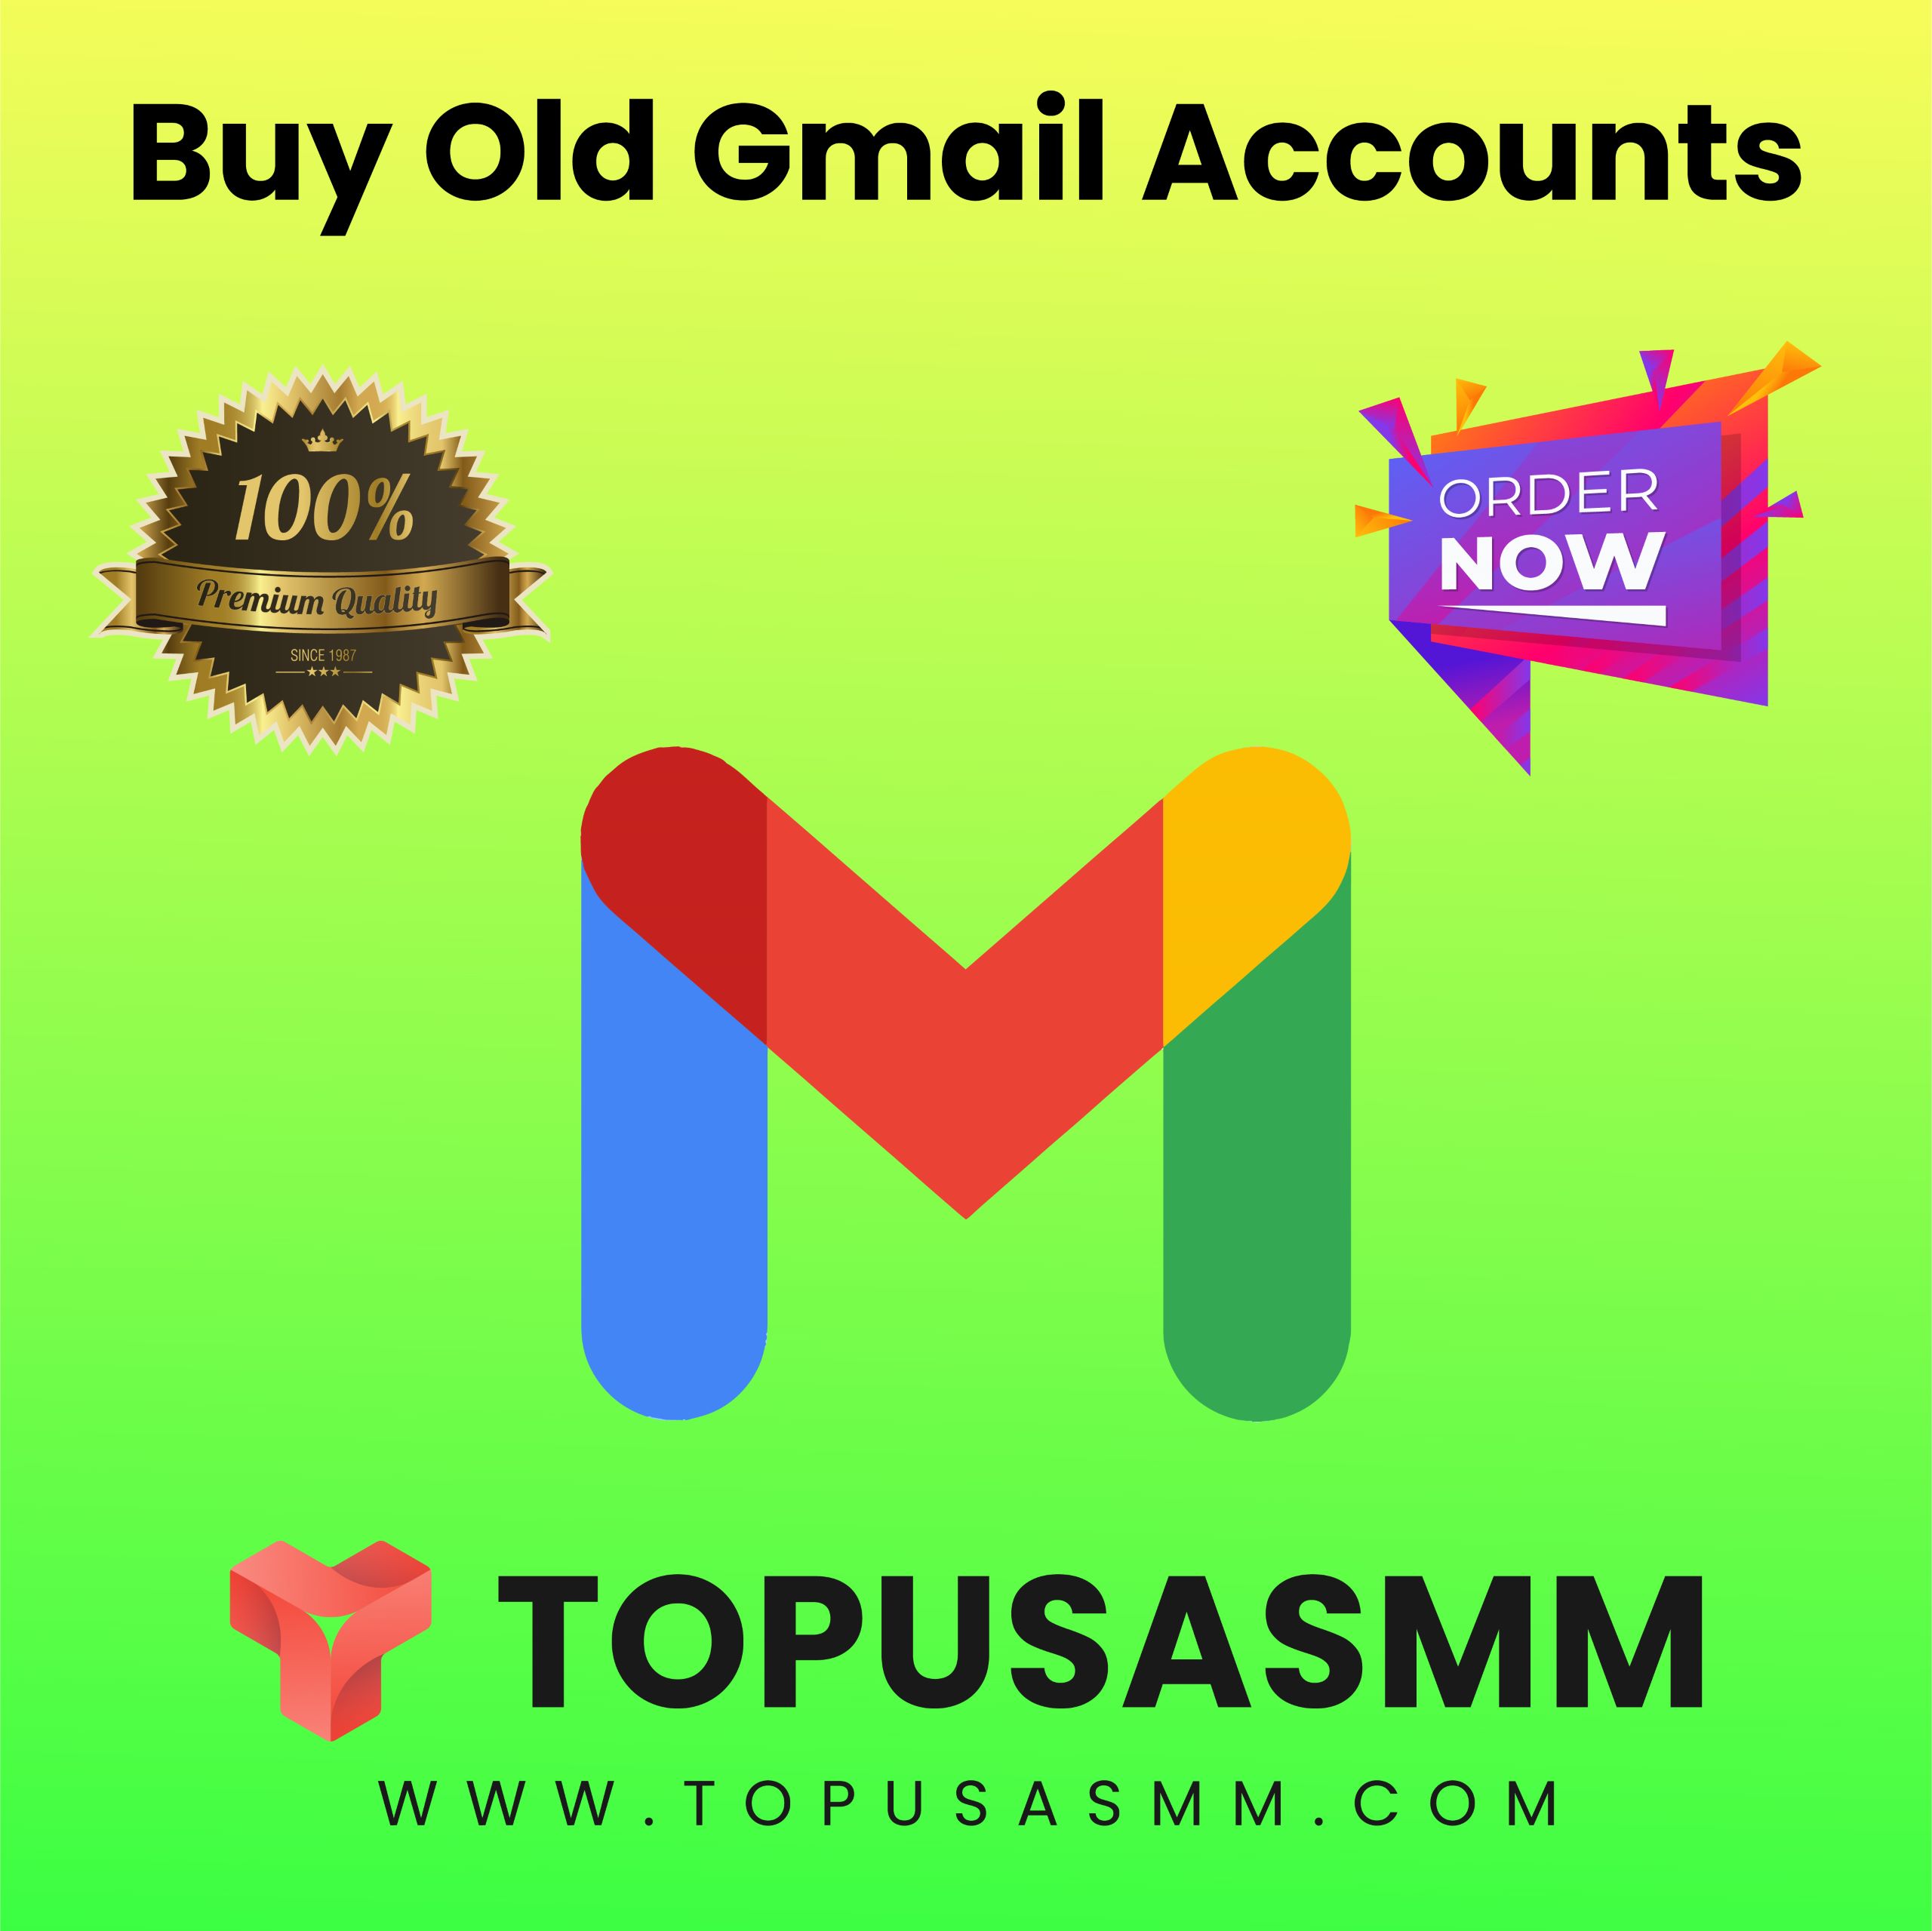 Buy Old Gmail Accounts - Top USA SMM